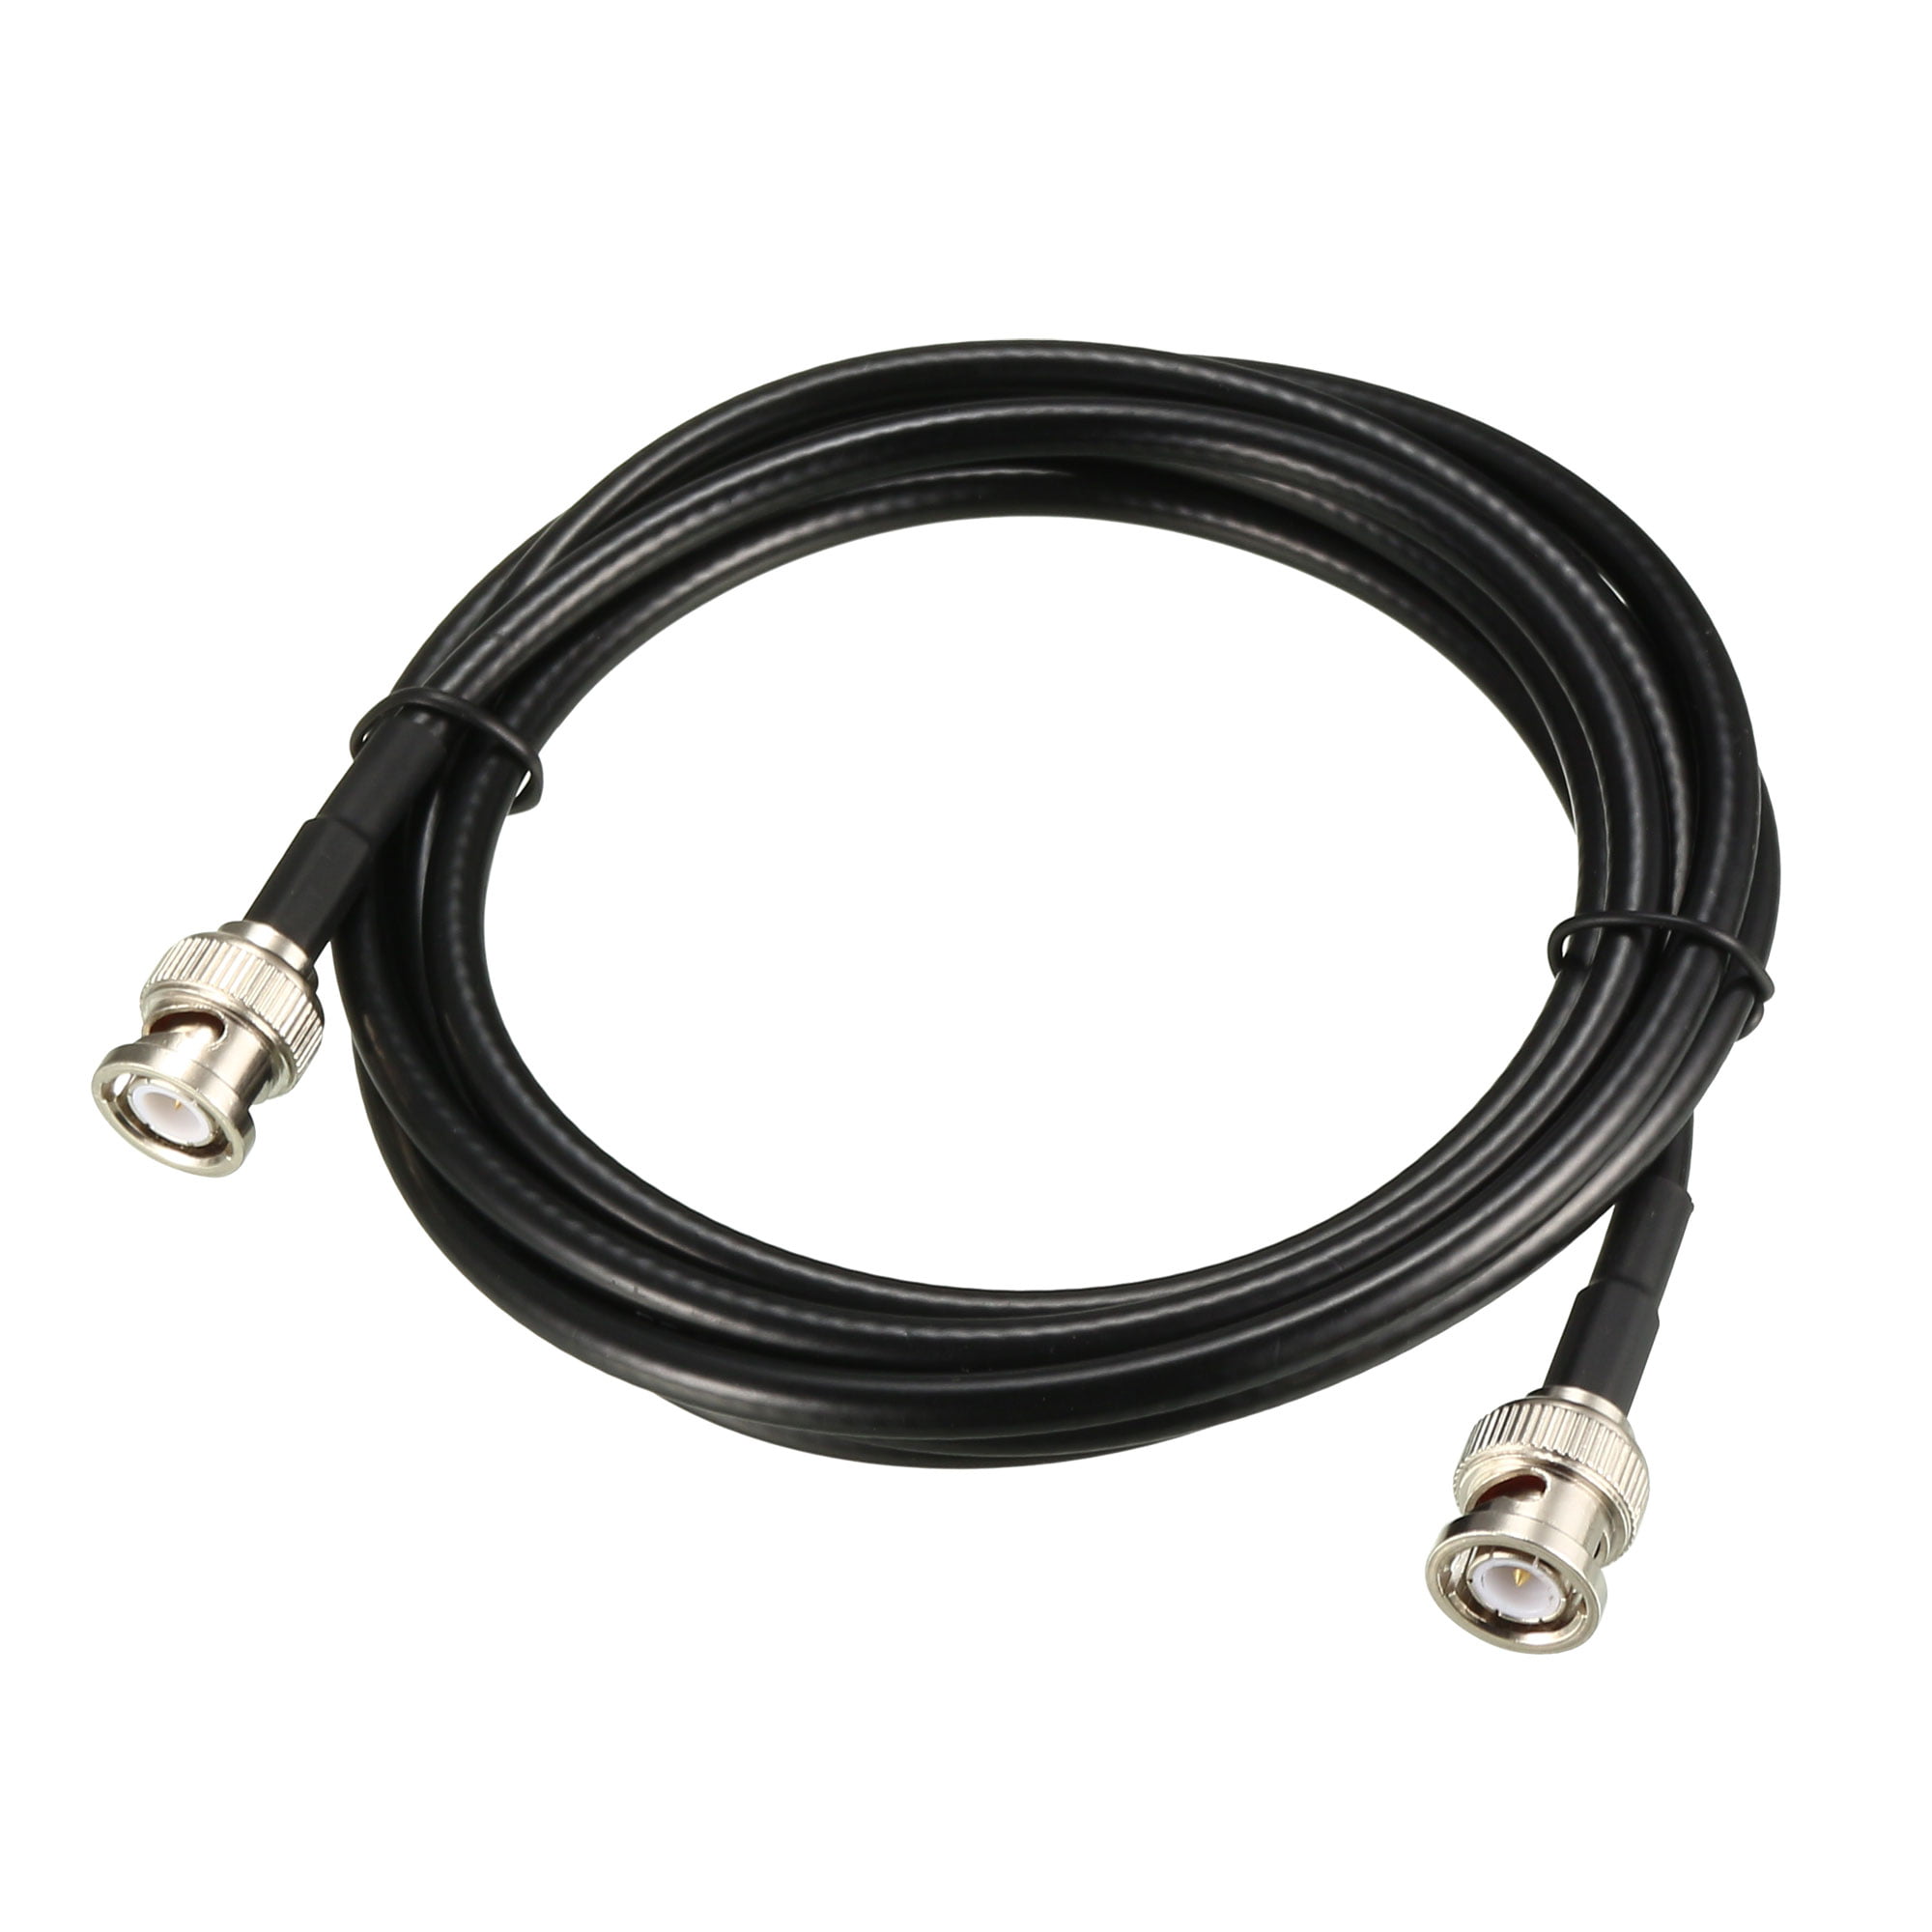 BNC to RG58 Type Coaxial Cable Adapter Connector  x 1 